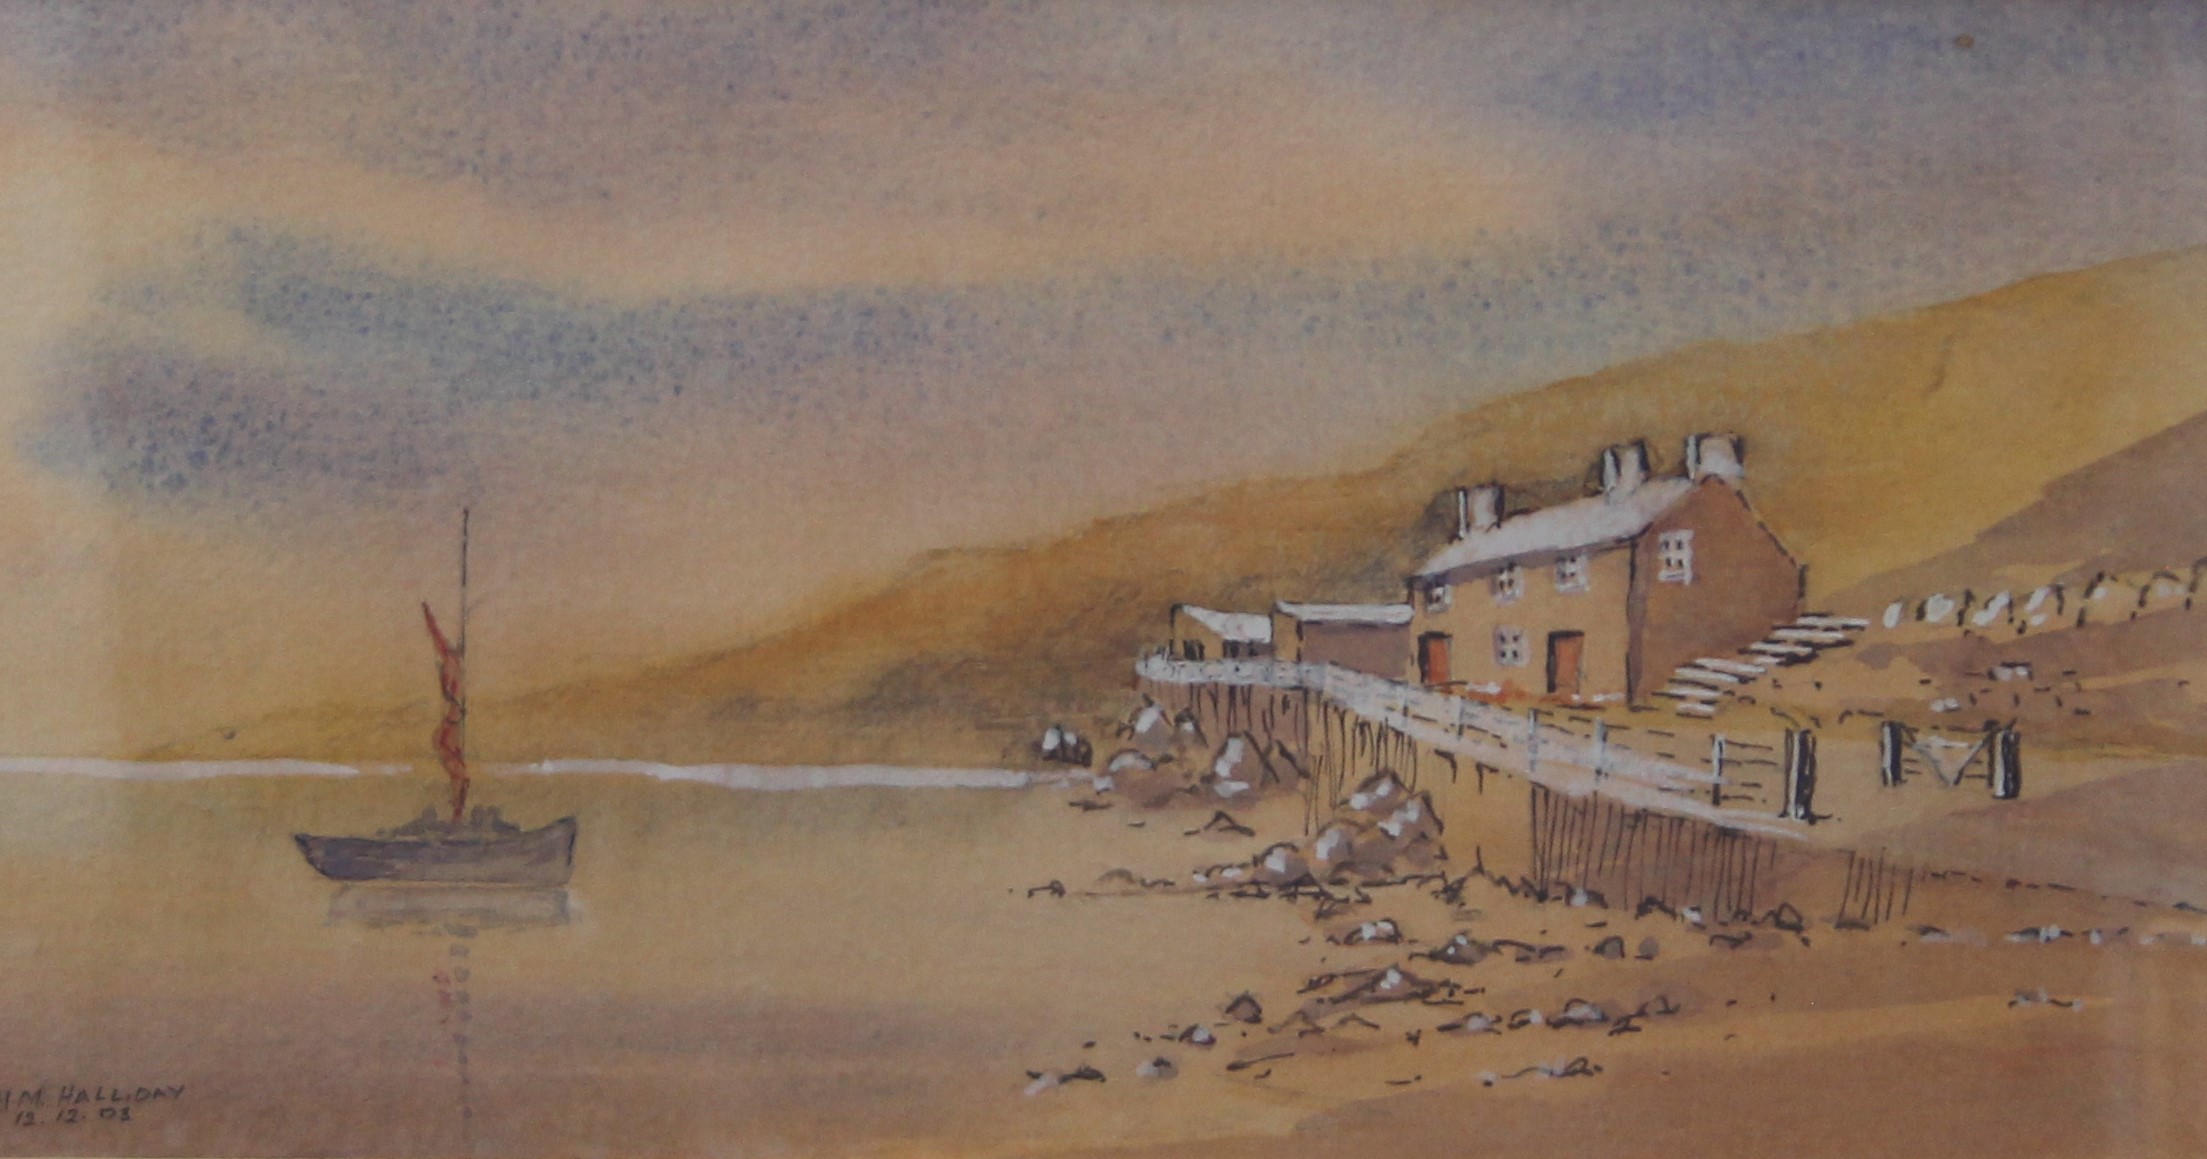 H M HALLIDAY, Coastal Scene, watercolour, signed and dated 12.12.03, framed and glazed. 29.5 x 15.